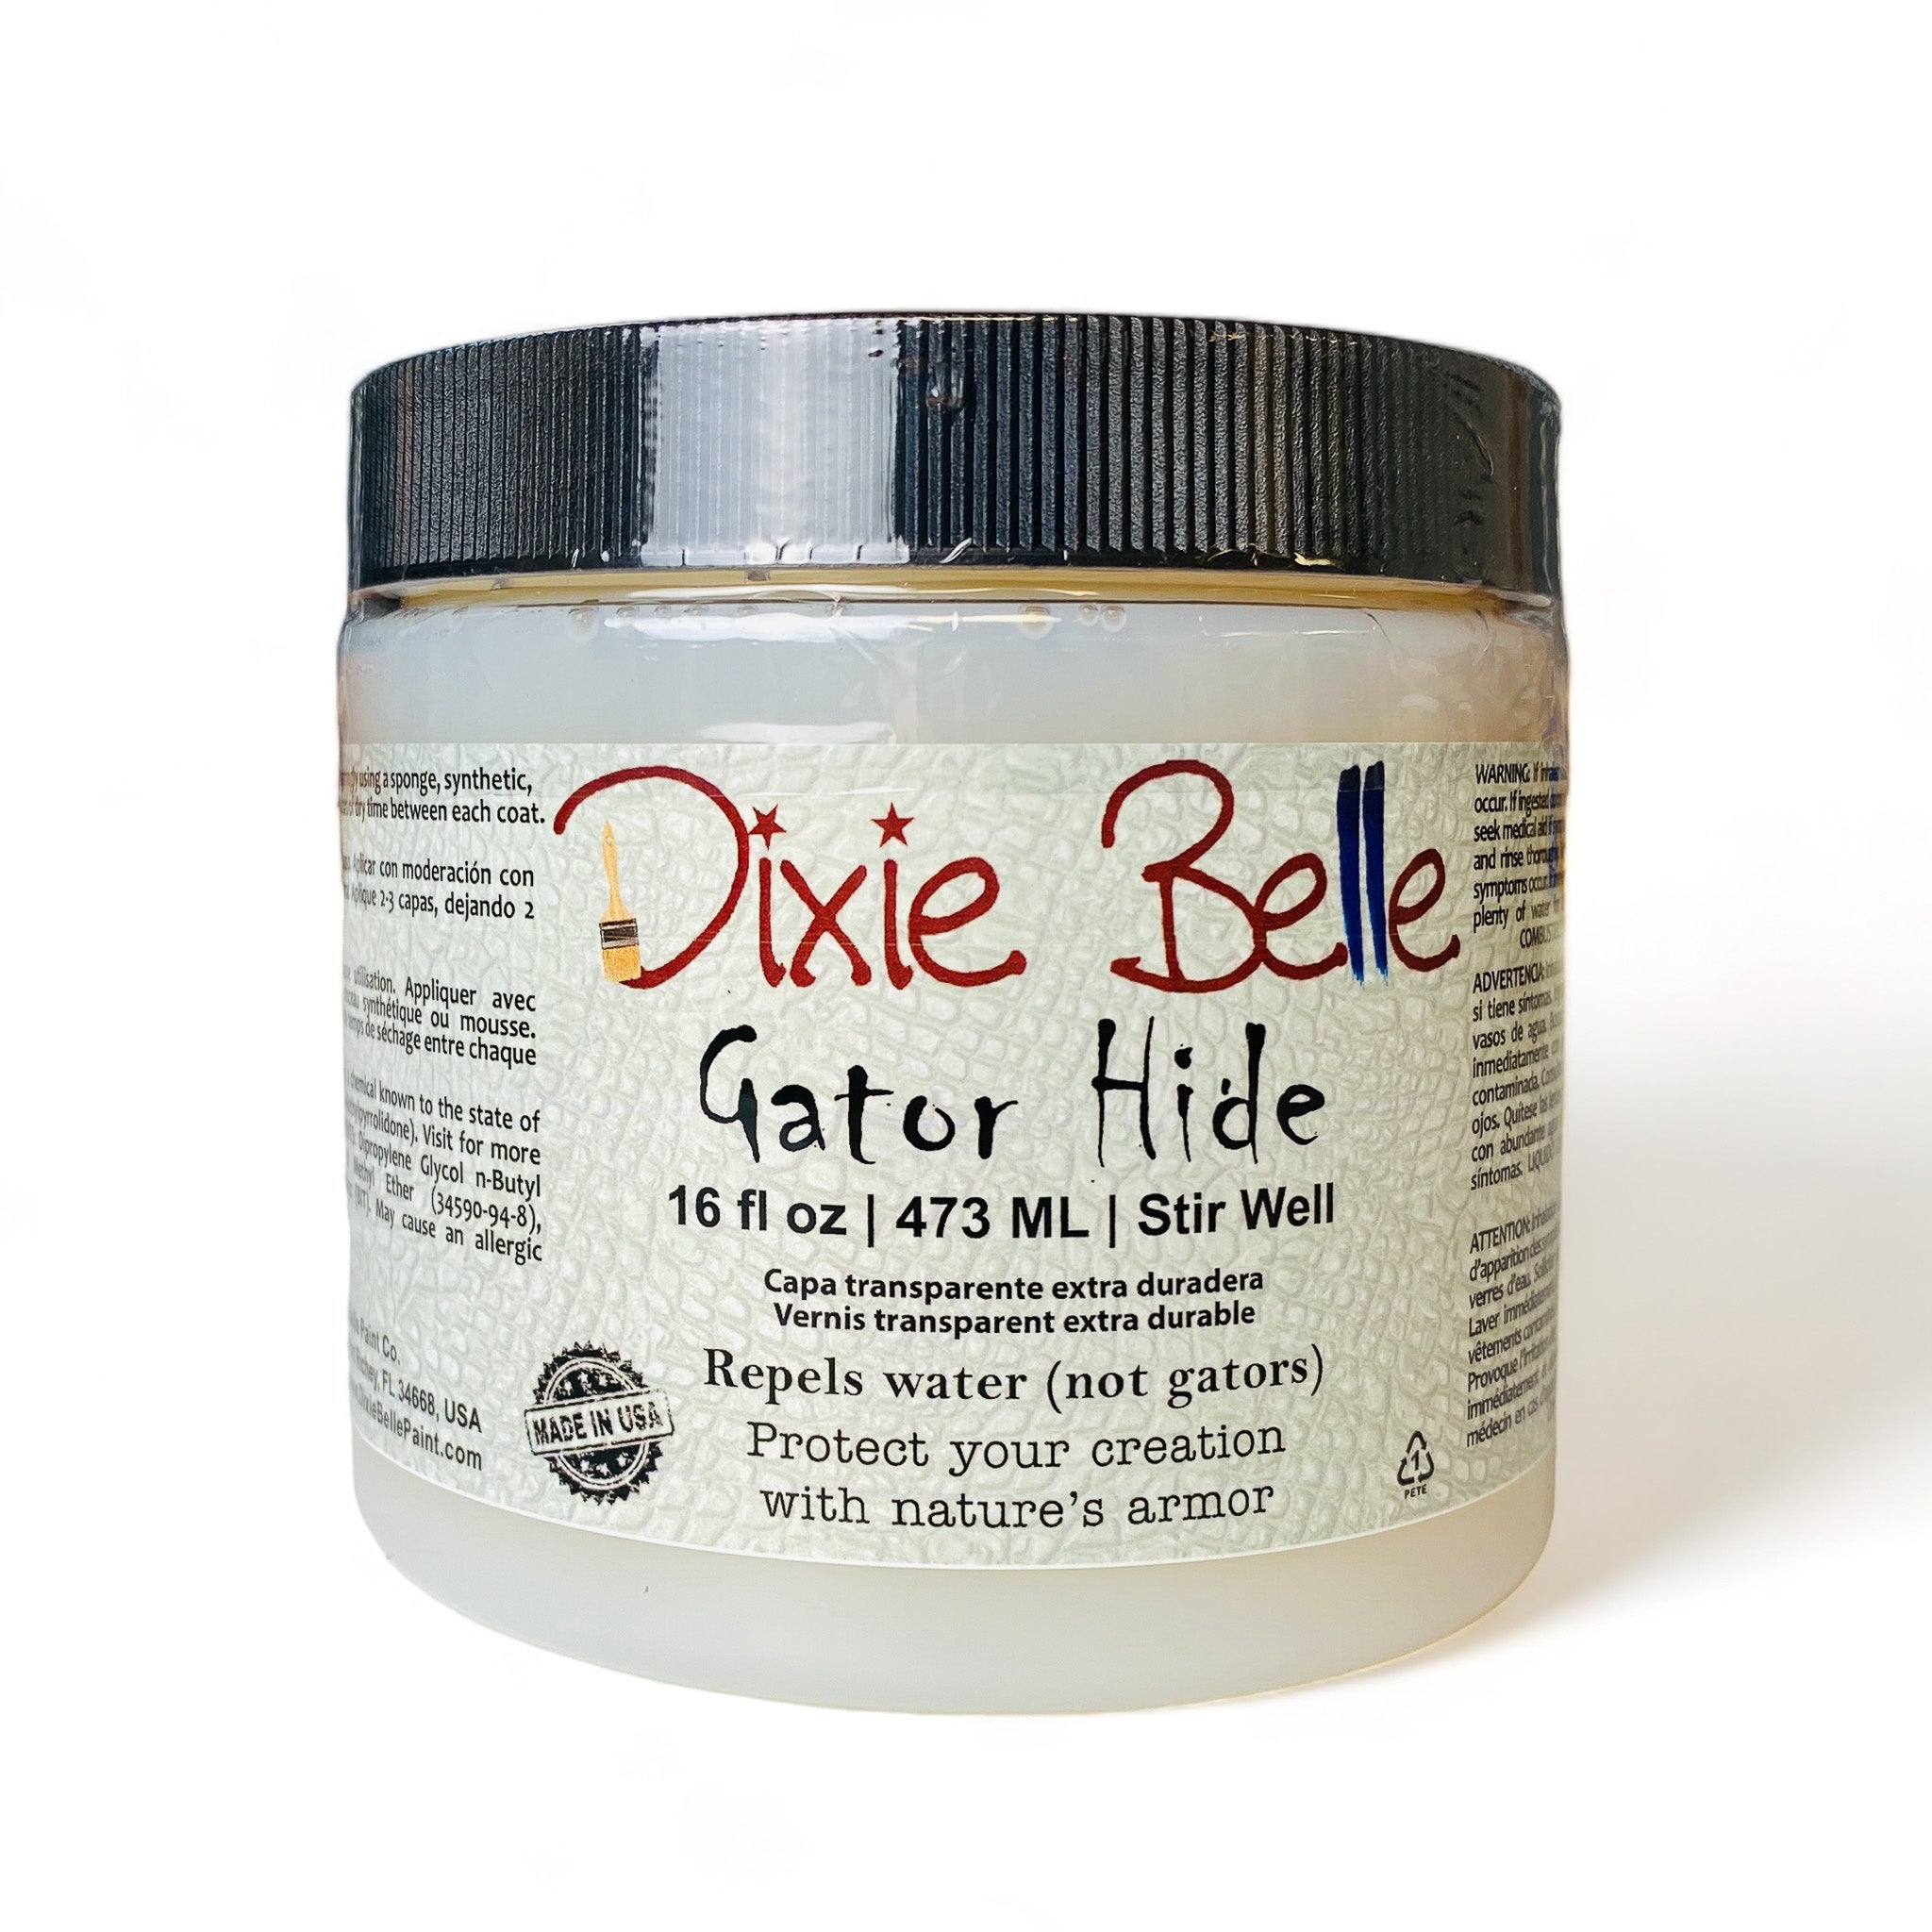 A 16oz container of Dixie Belle's Gator Hide is against a white background.